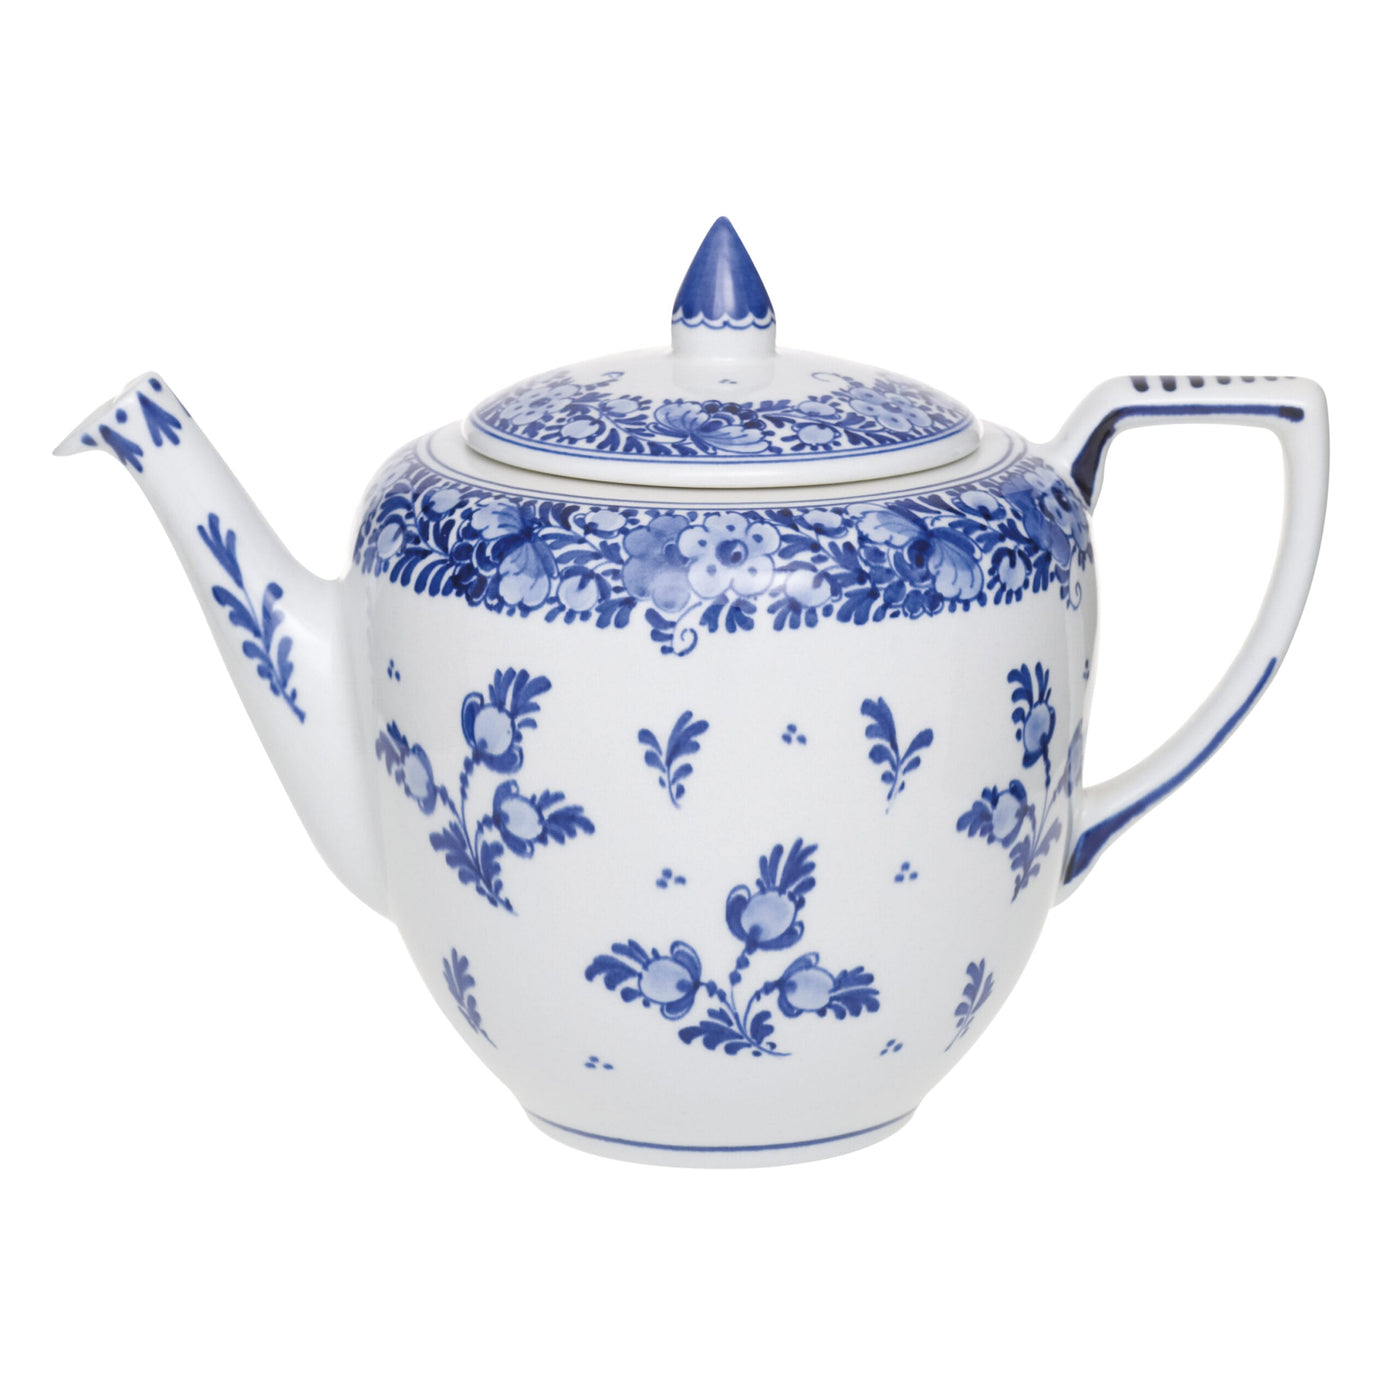 Delft Blue Hand-Painted Teapot by Royal Delft